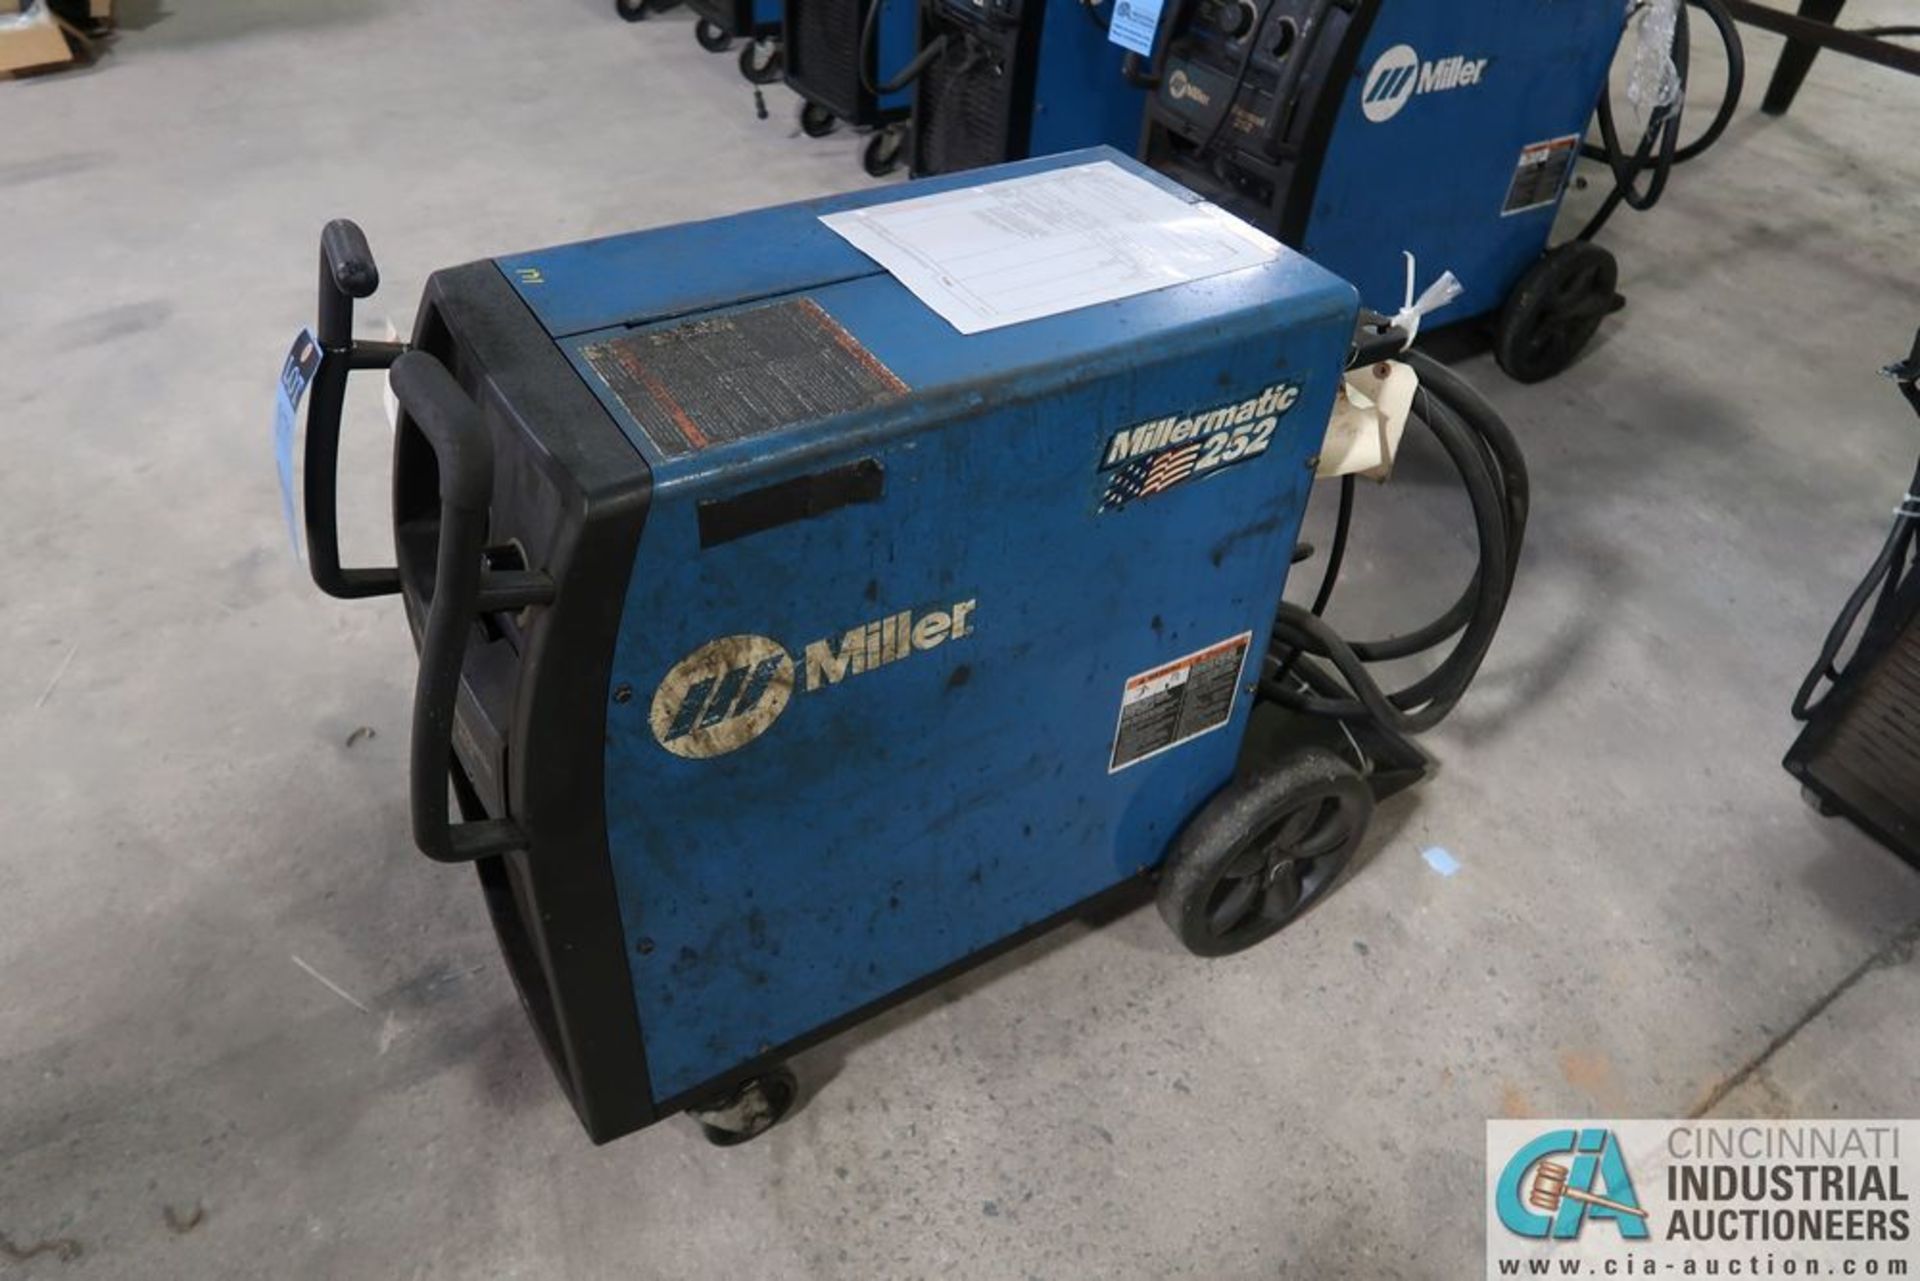 250 AMP MILLER MODEL MILLERMATIC 252 MIG WELDING POWER SOURCE; S/N MB240158N, WITH BUILT-IN WIRE - Image 2 of 7